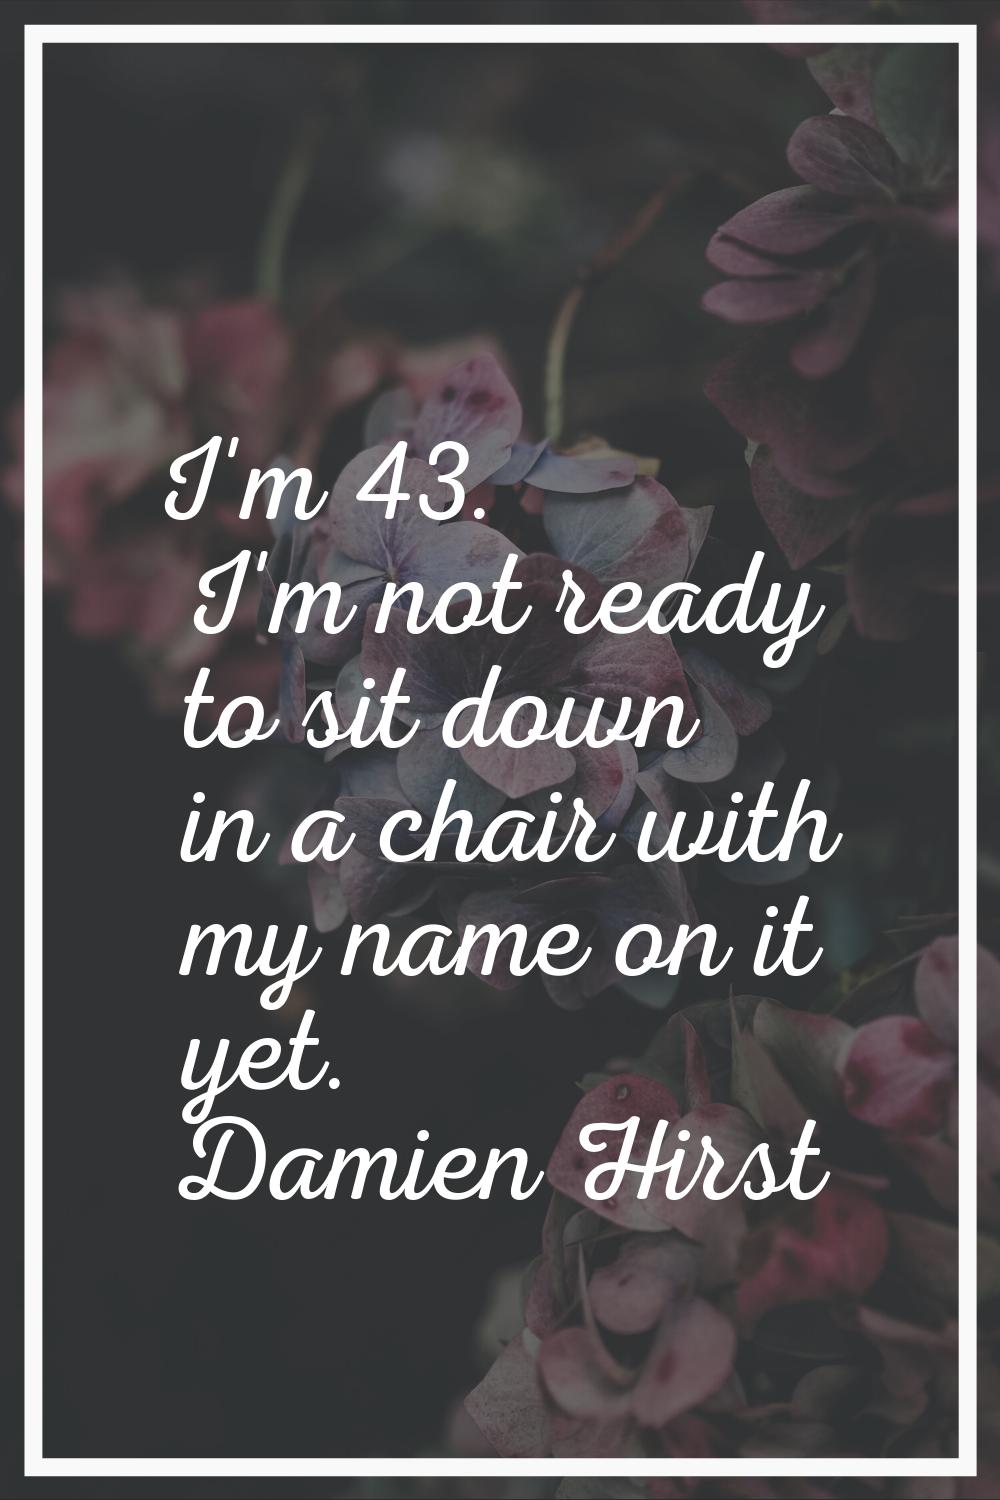 I'm 43. I'm not ready to sit down in a chair with my name on it yet.